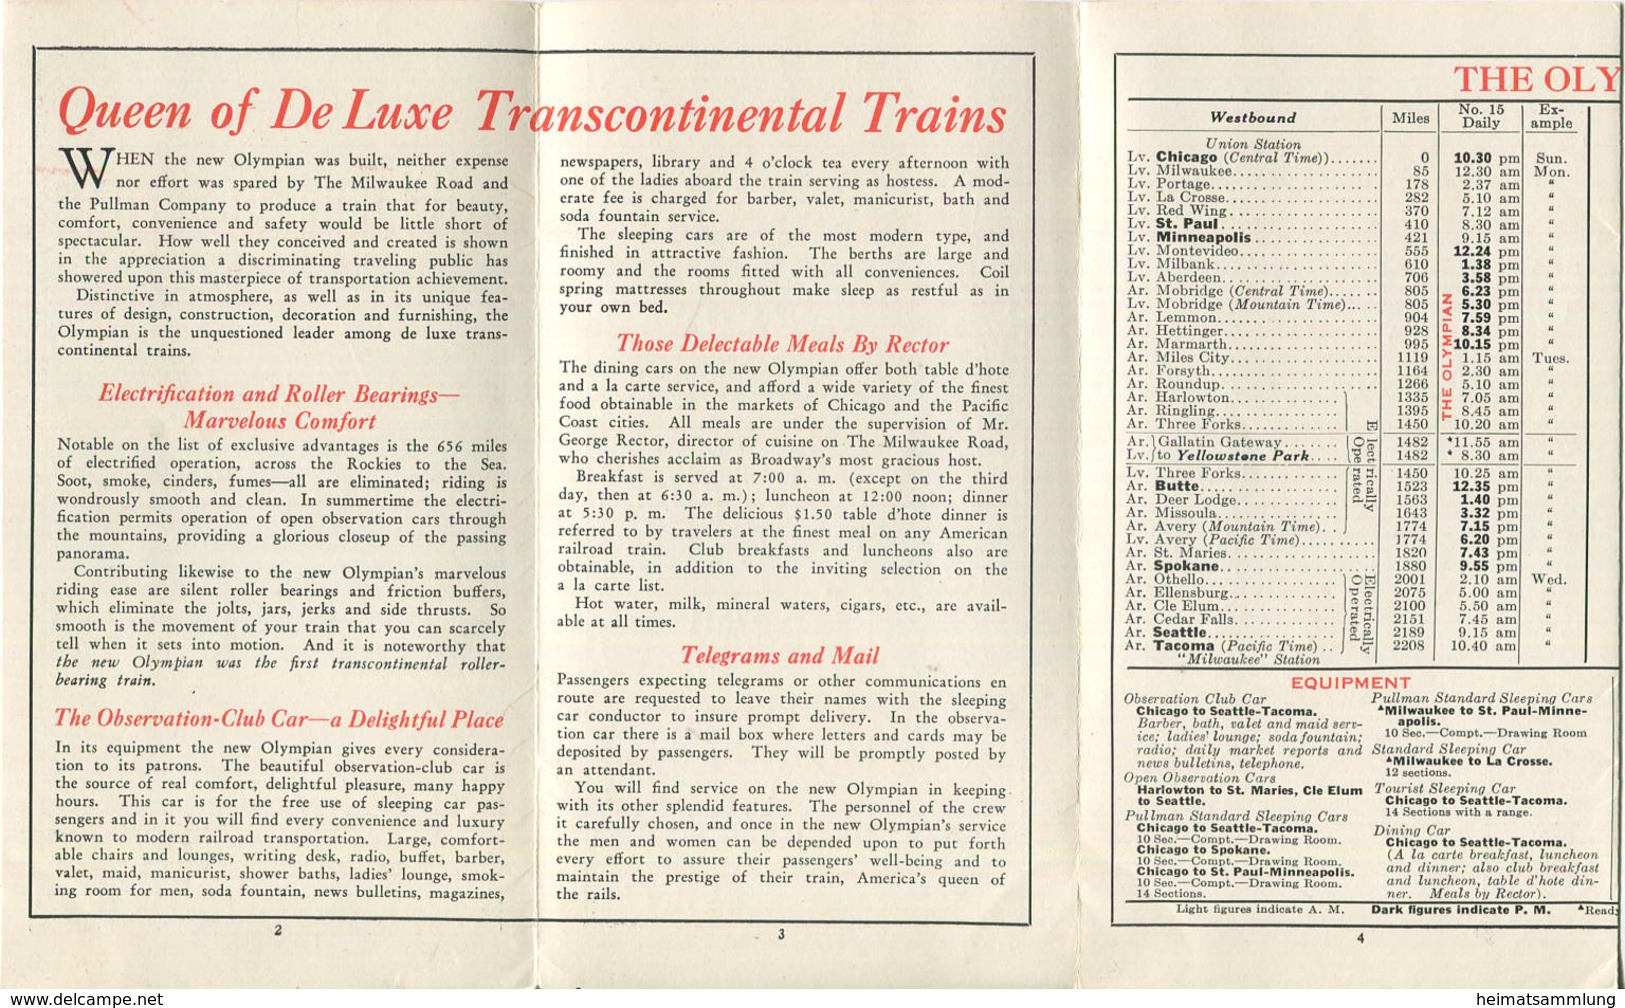 The Olympian 1930 - Queen Of De Luxe Transcontinental Trains - Fahrplan Between Cjicago And Seattle-Tacoma - Welt